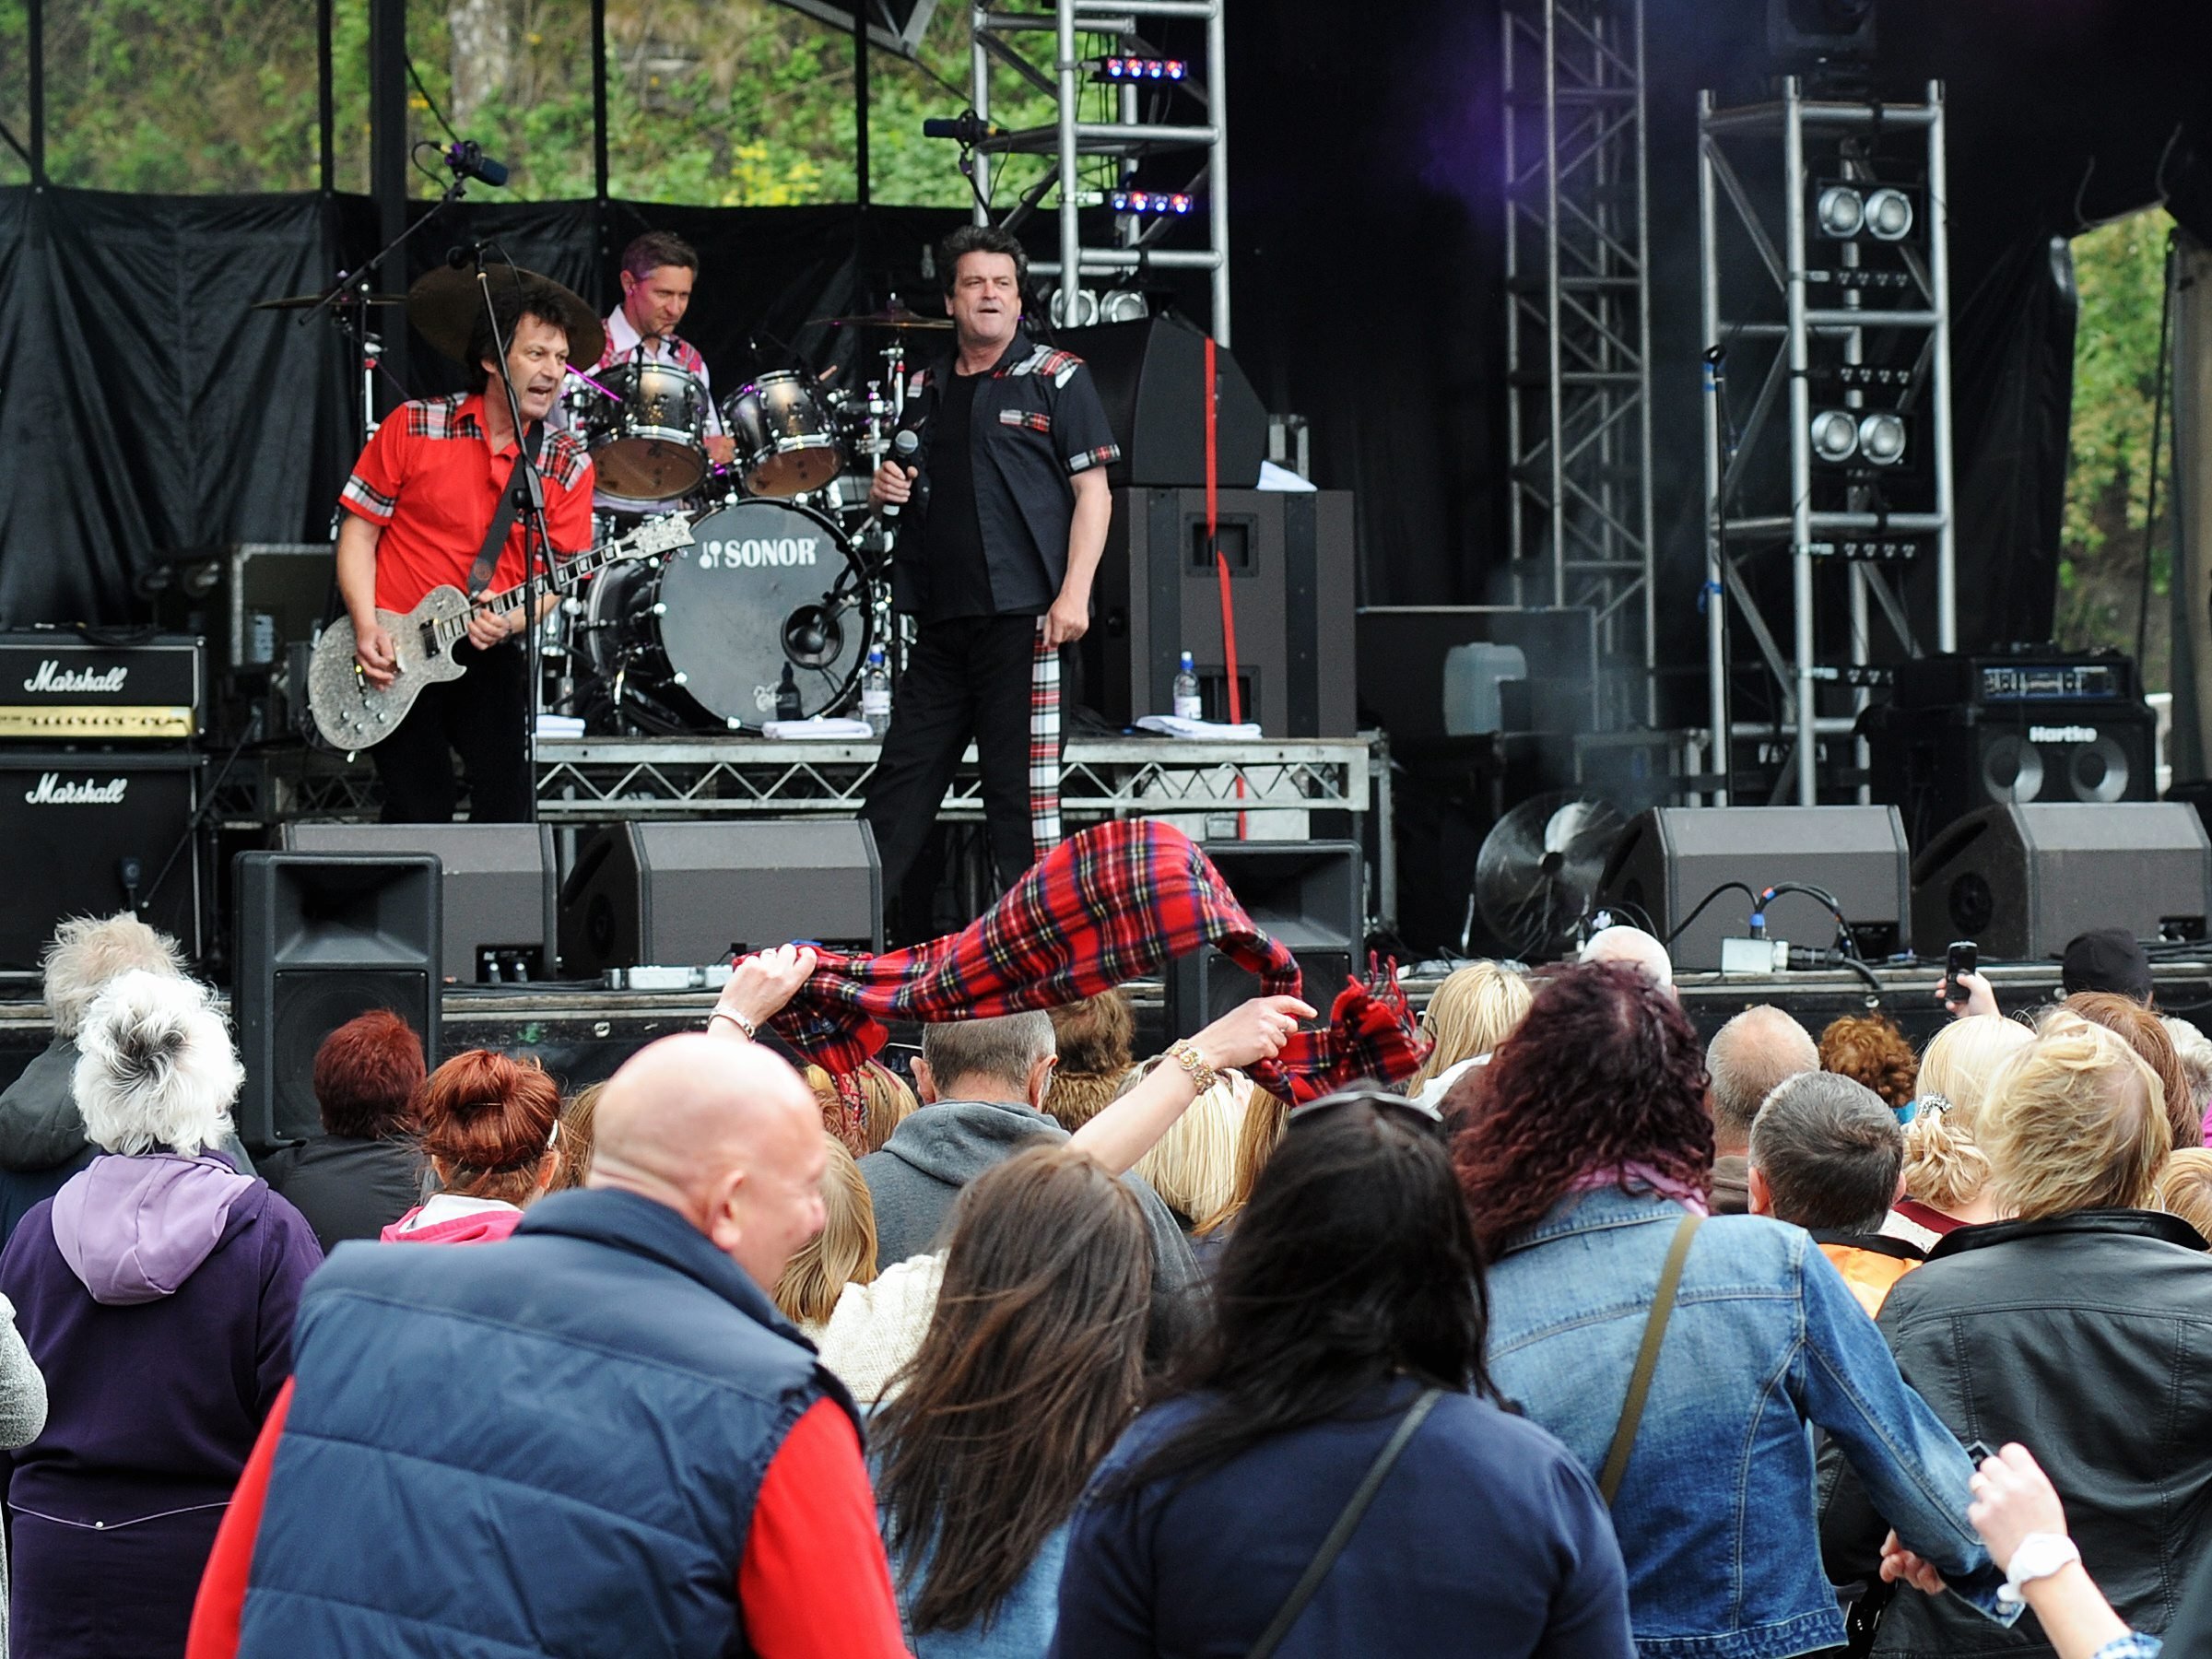 2013 Whitehaven Festival - Sunday. pic MIKE McKENZIE 21st June Bay City Rollers in action. pic Mike McKenzie 50049893W029.JPG